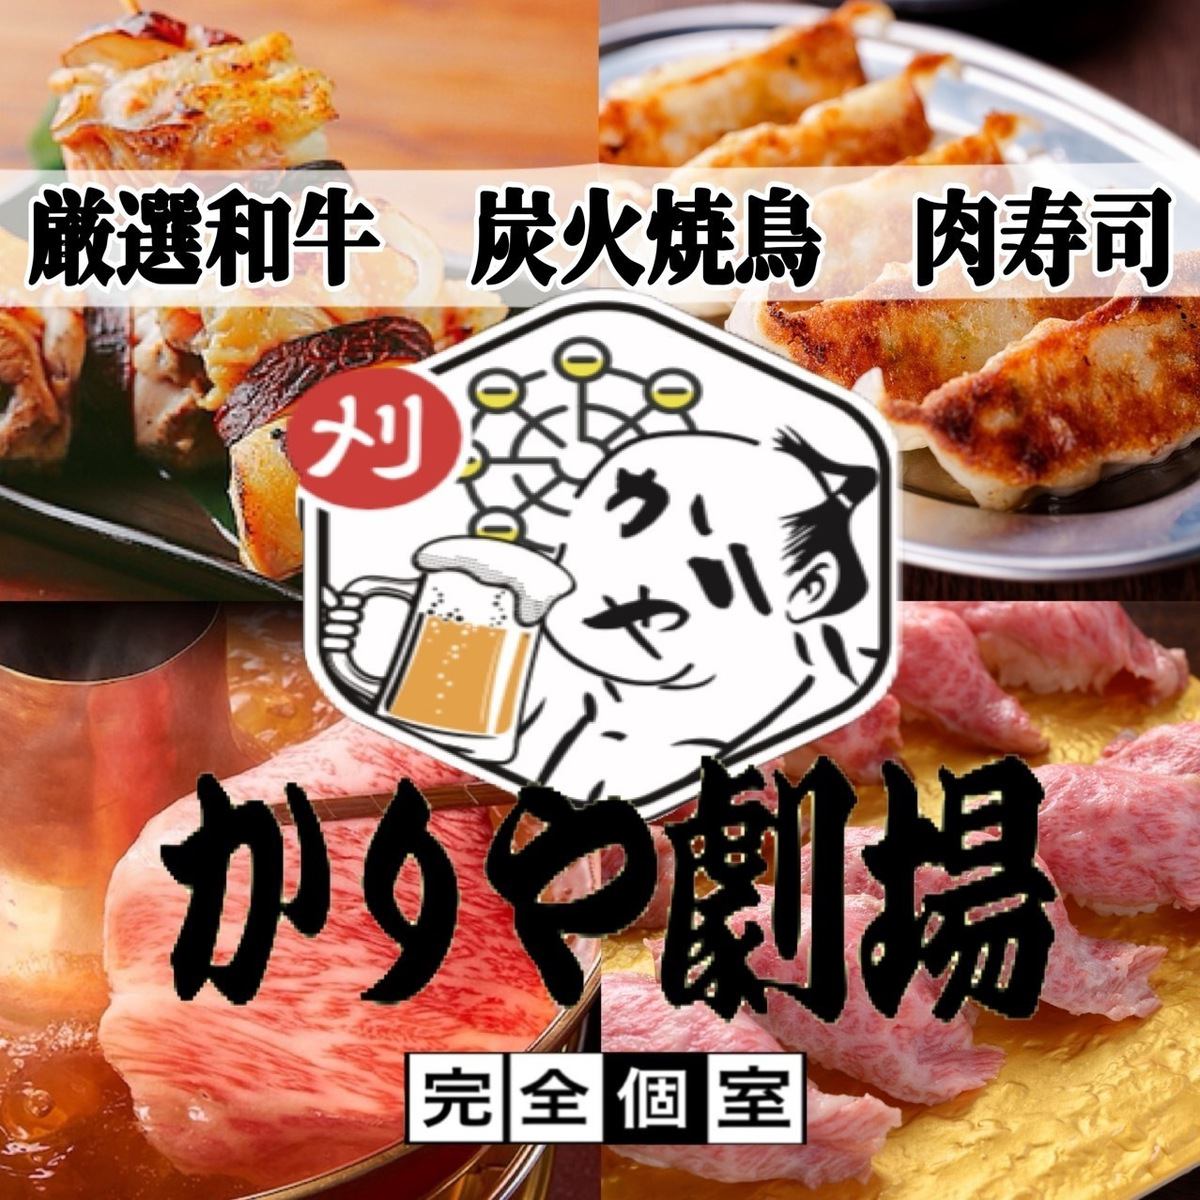 1 minute walk from Kariya Station Yakitori meat sushi is now available as an all-you-can-eat and drink plan ♪ 3 hours (200 items in total) from 3,000 yen